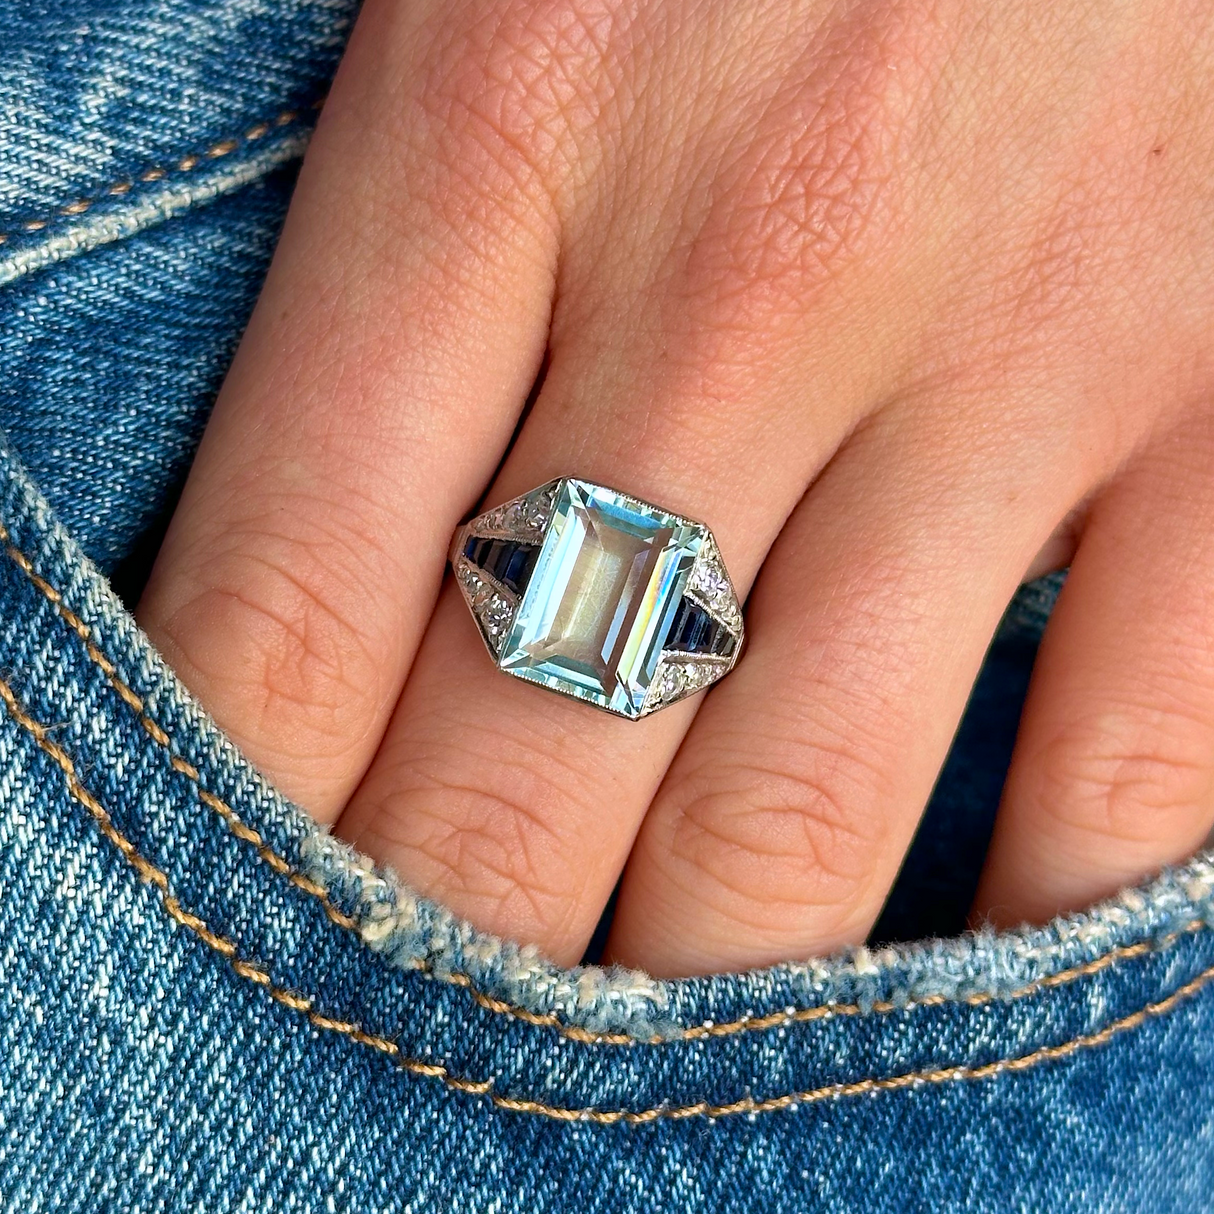 Vintage aquamarine,sapphire and diamond ring worn on hand in pocket of jeans